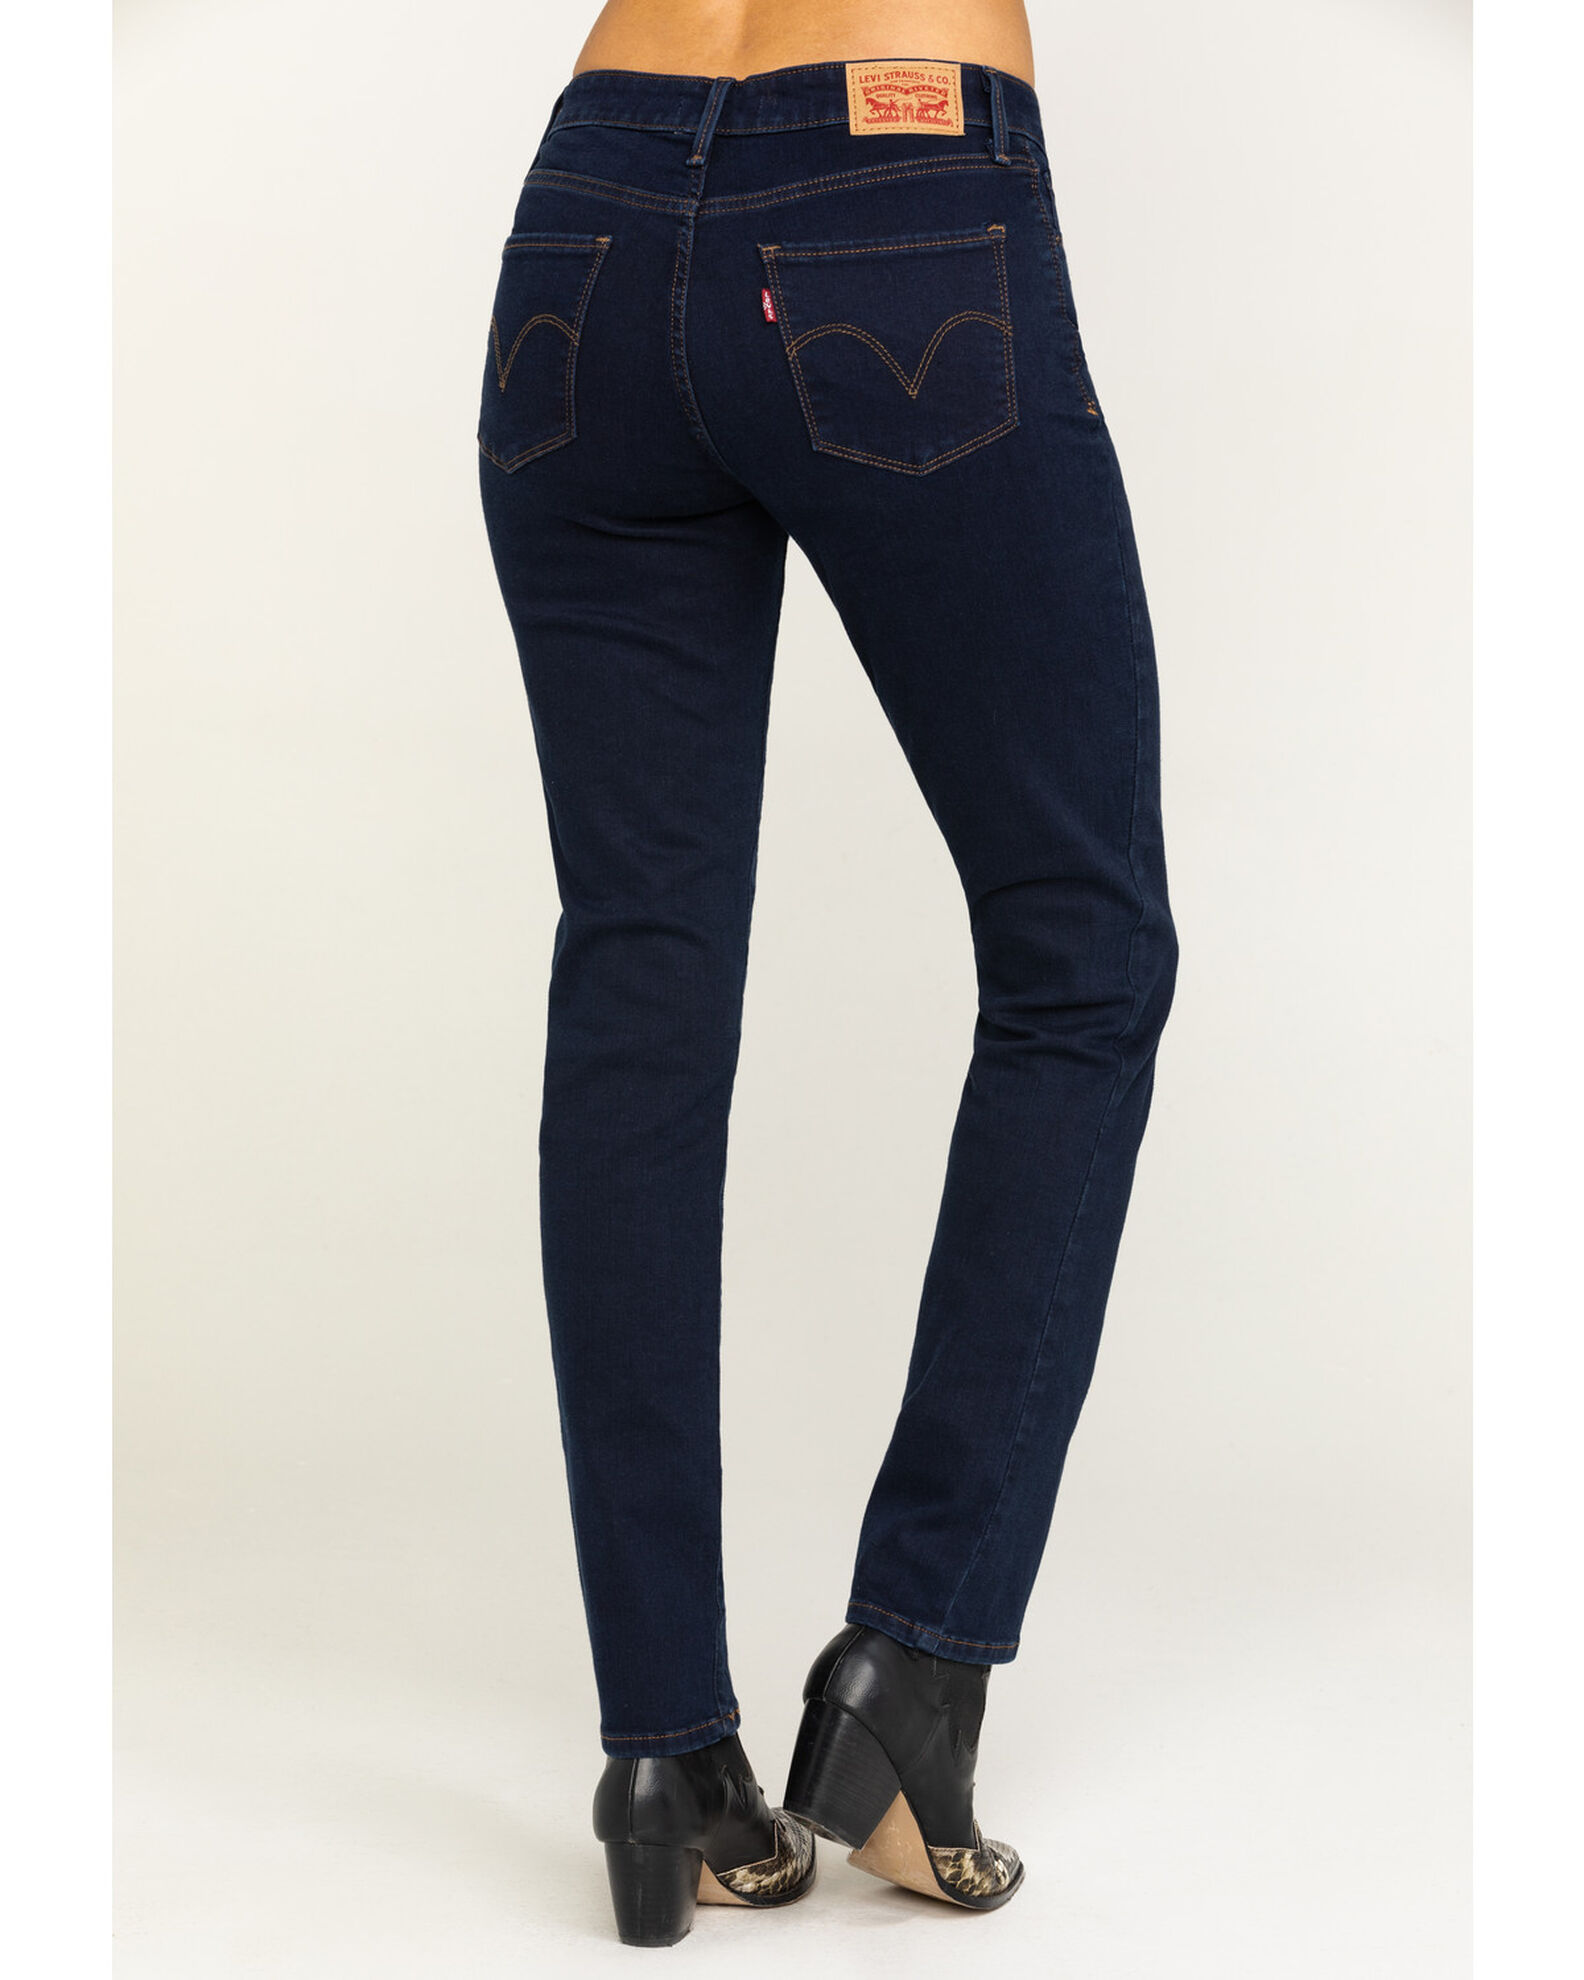 Levi's Women's Mid Rise Skinny Jeans - Country Outfitter